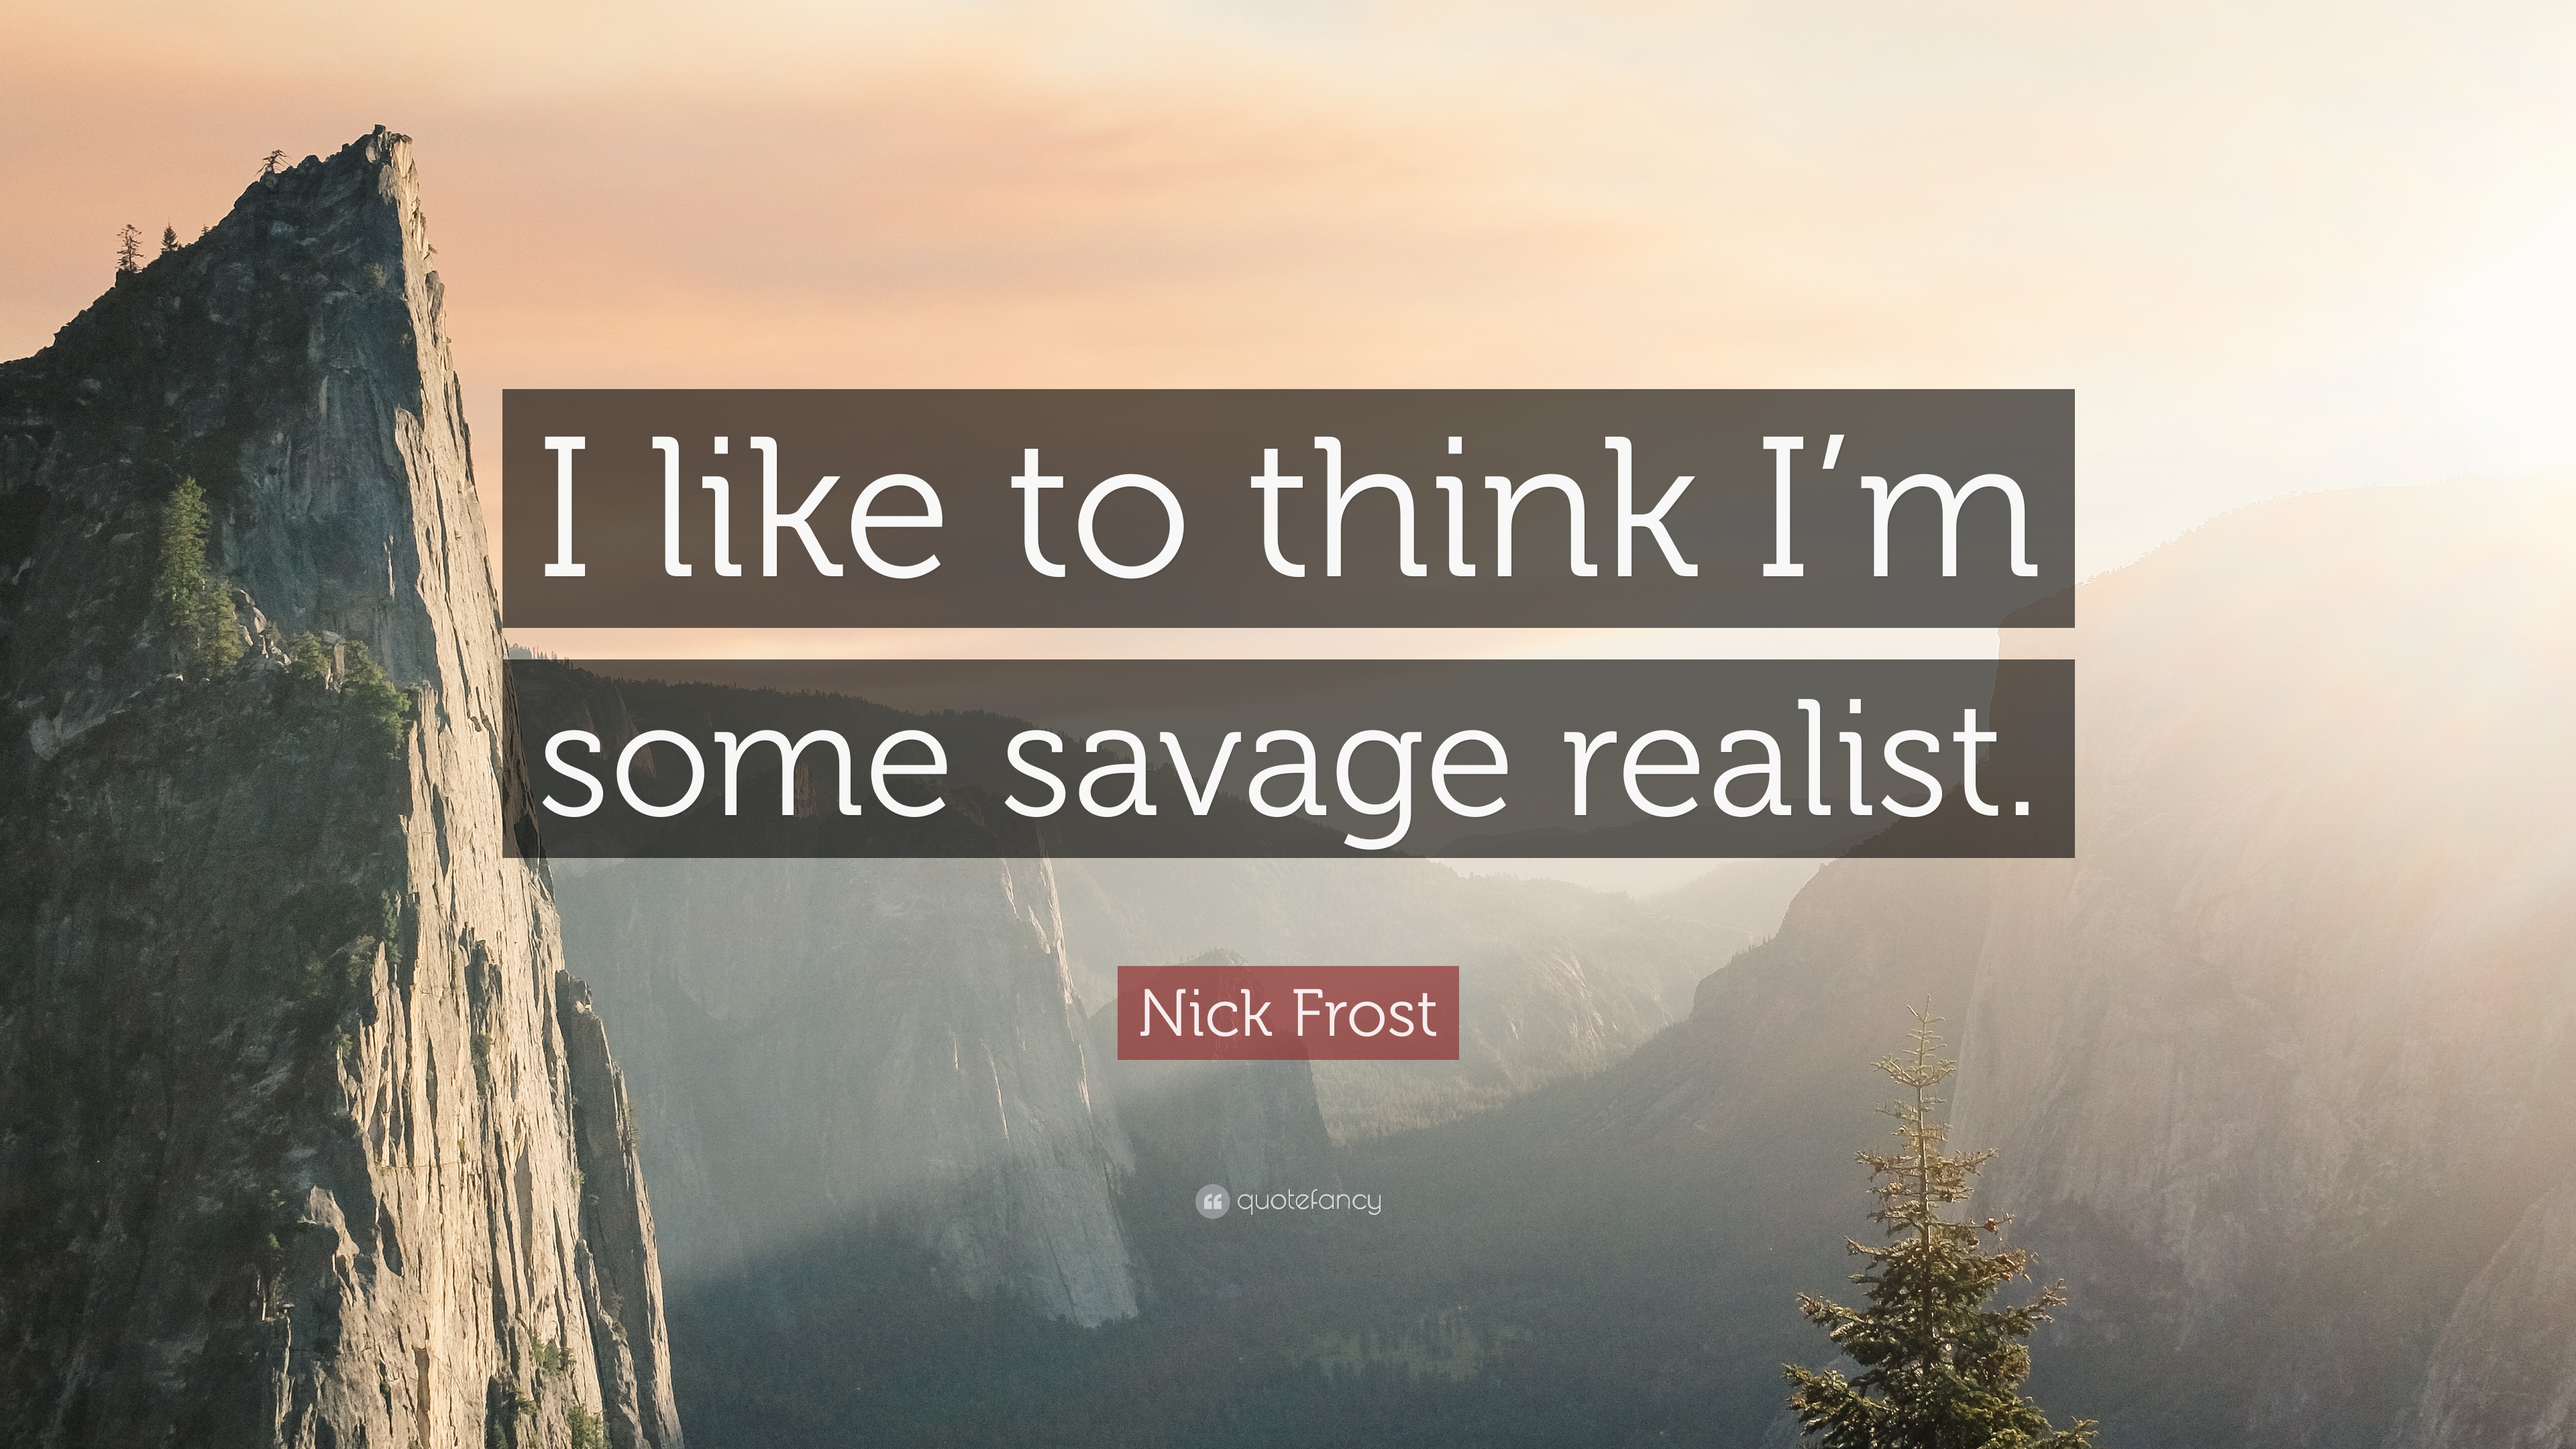 Nick Frost Quote: “I like to think I'm some savage realist